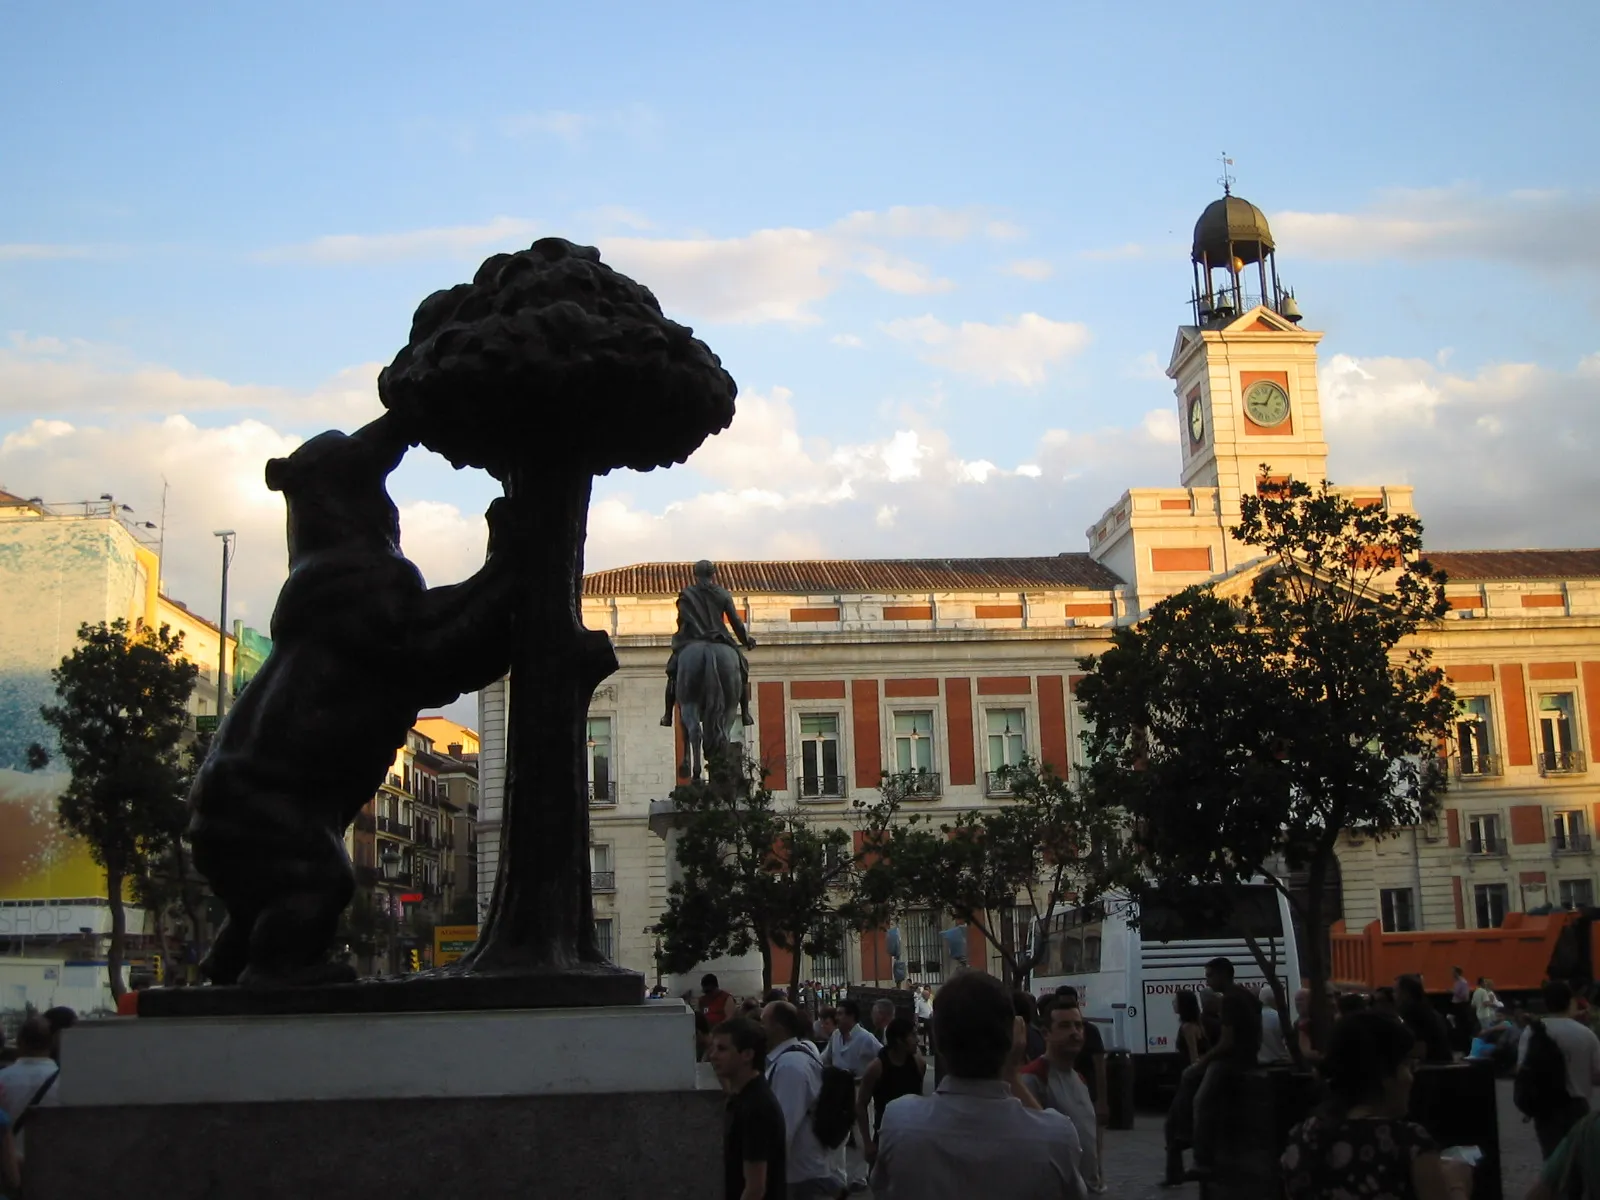 Photo showing: Taken by Rifleman 82 on 310506.
Bear and the Madrono Tree, heraldic symbol of Madrid. Sculpture at Puerta del Sol, Madrid